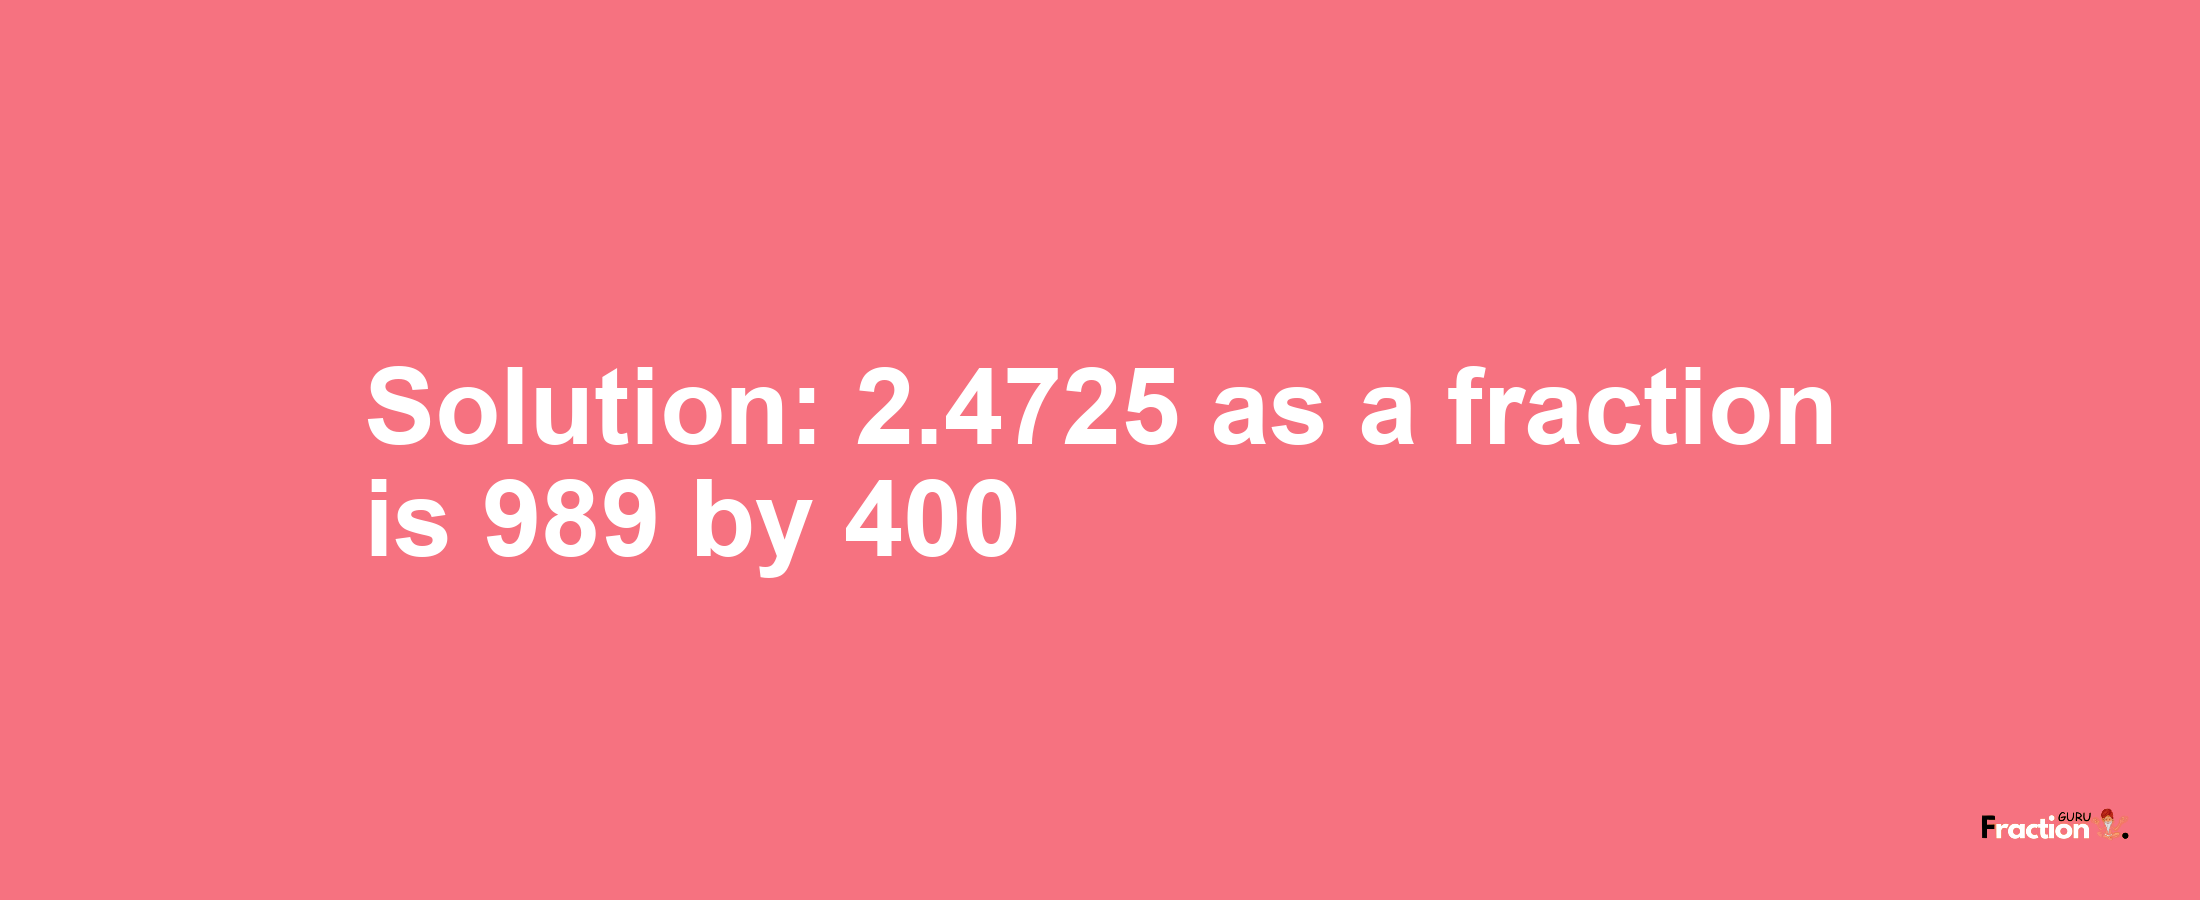 Solution:2.4725 as a fraction is 989/400